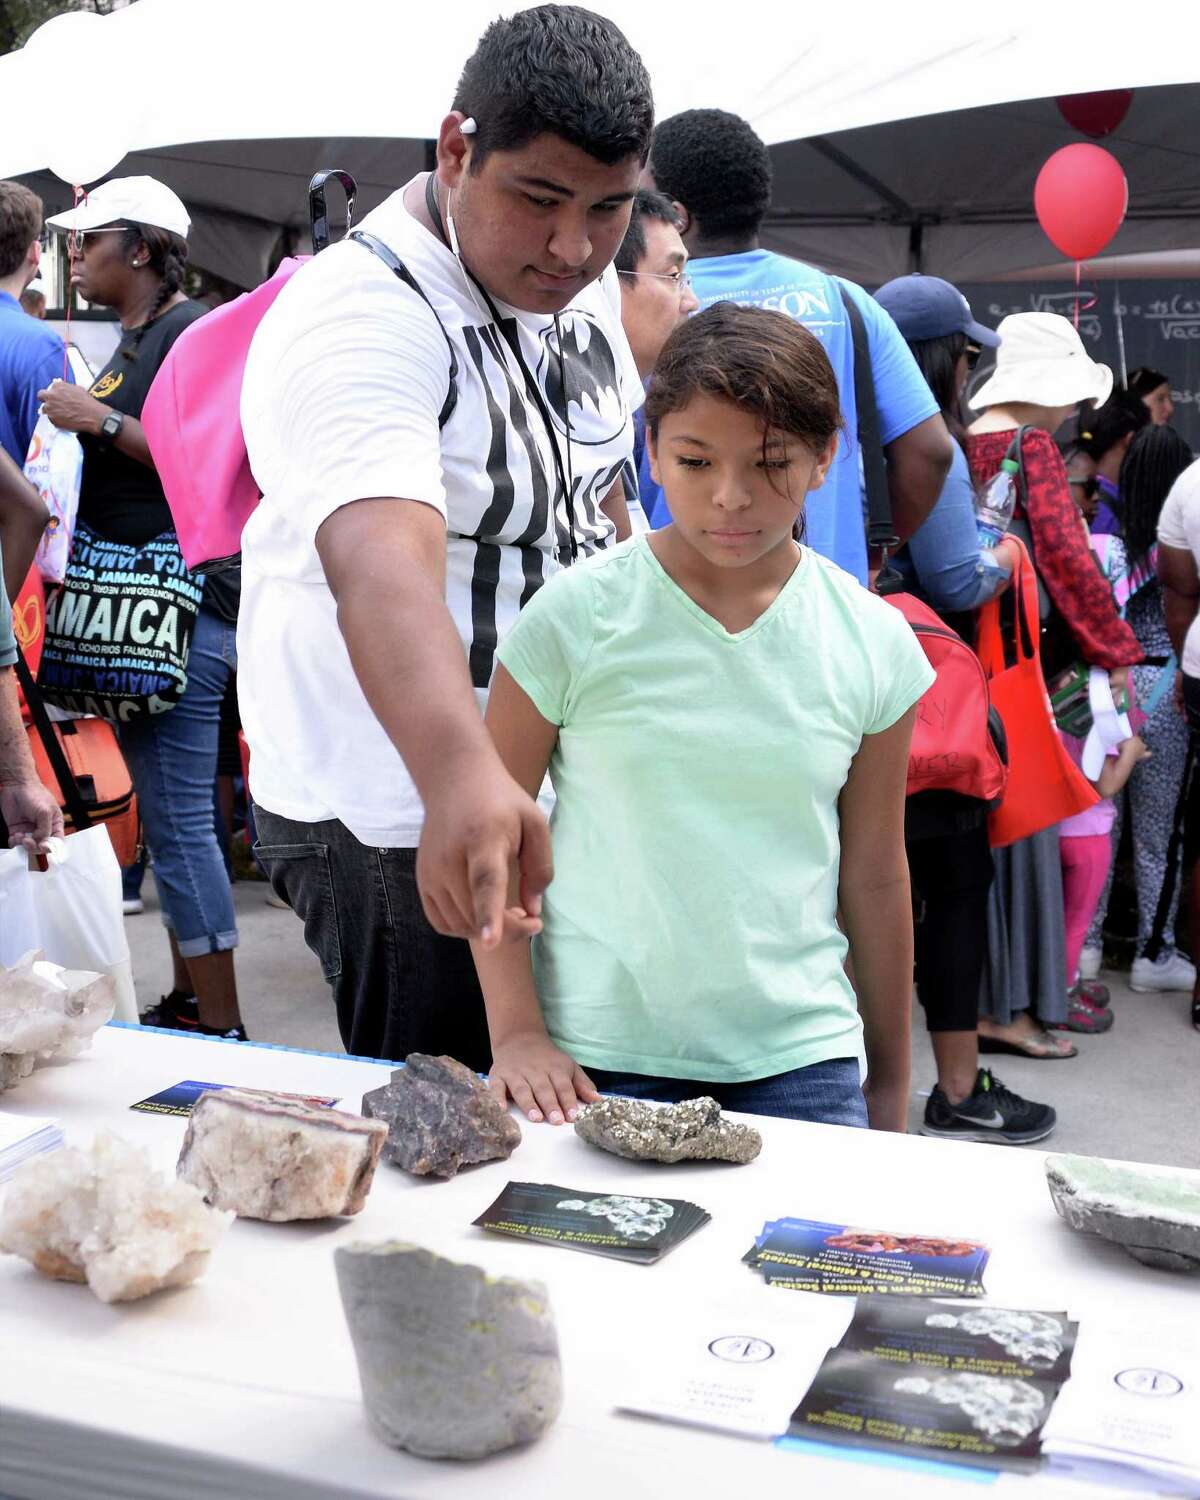 The Consumer Energy Education Foundation and Consumer Energy Alliance sponsored the annual Energy Day Festival.